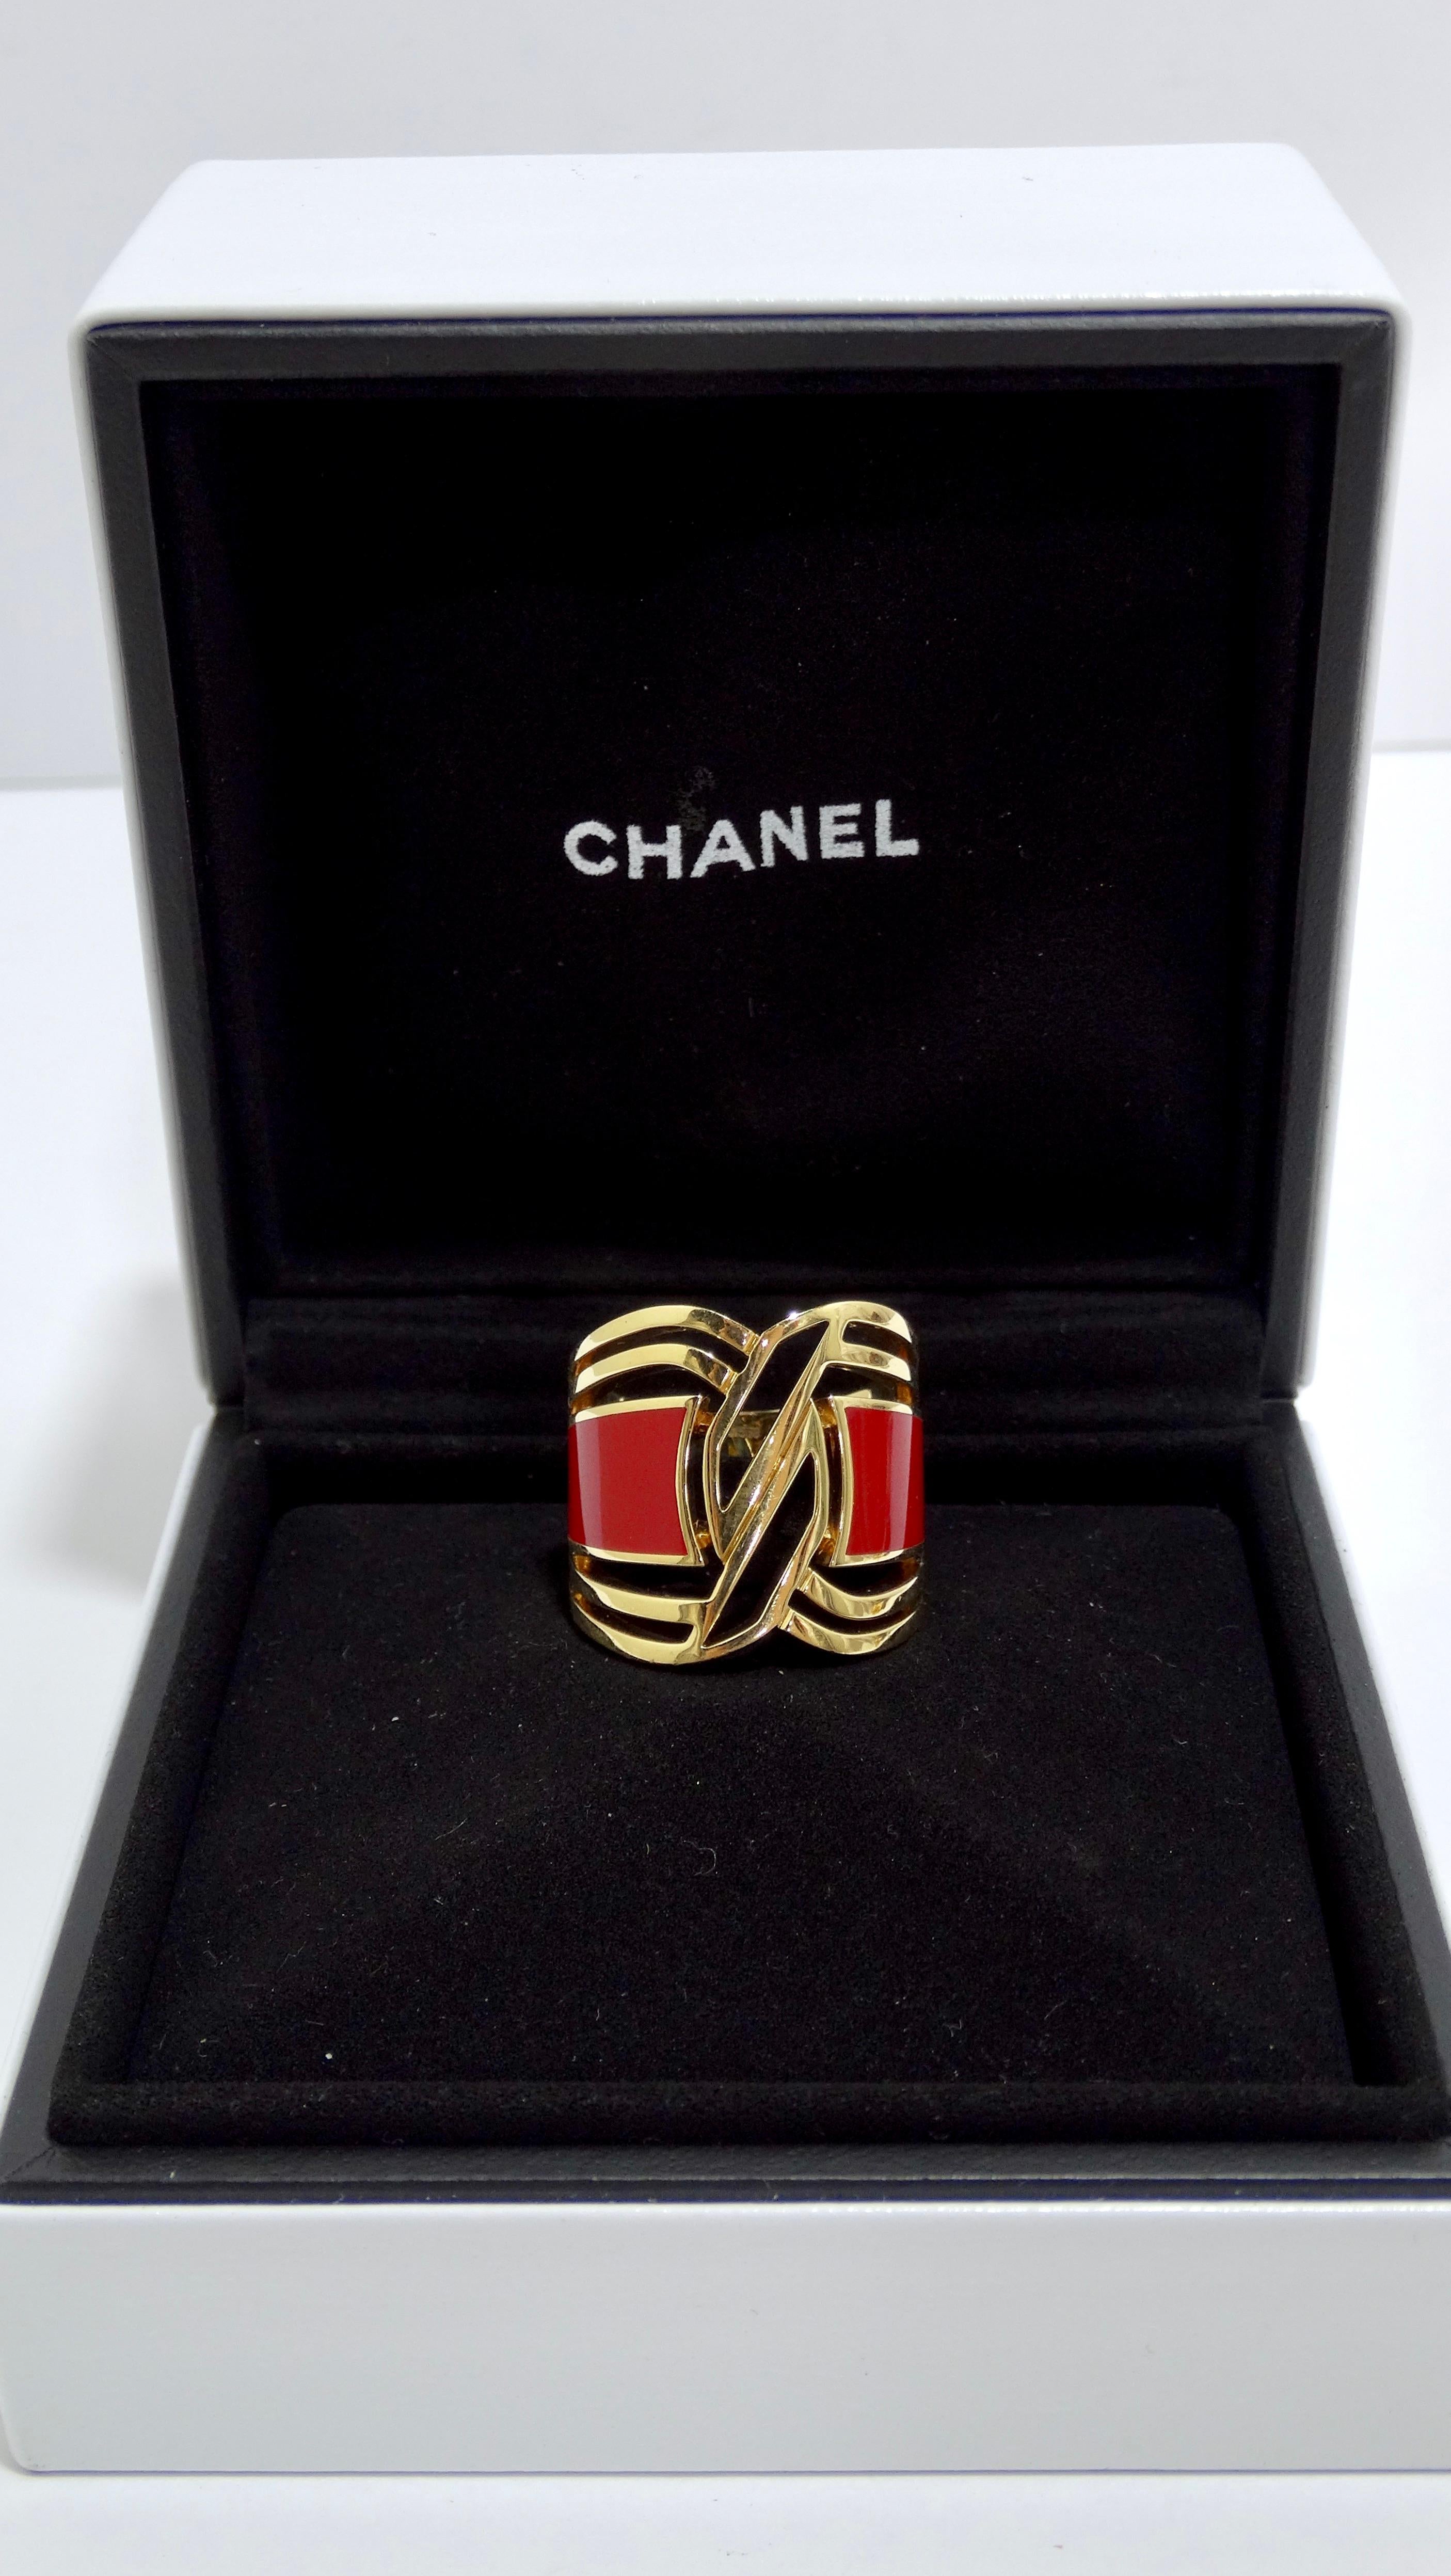 This Chanel ring gives a modern flair to the brand's ever-so-classic designs. This ring features geometrical cut outs made of 18k gold and features a HyCeram red band. HyCeram is a hard-wearing, scratch-resistant new material that mimics the